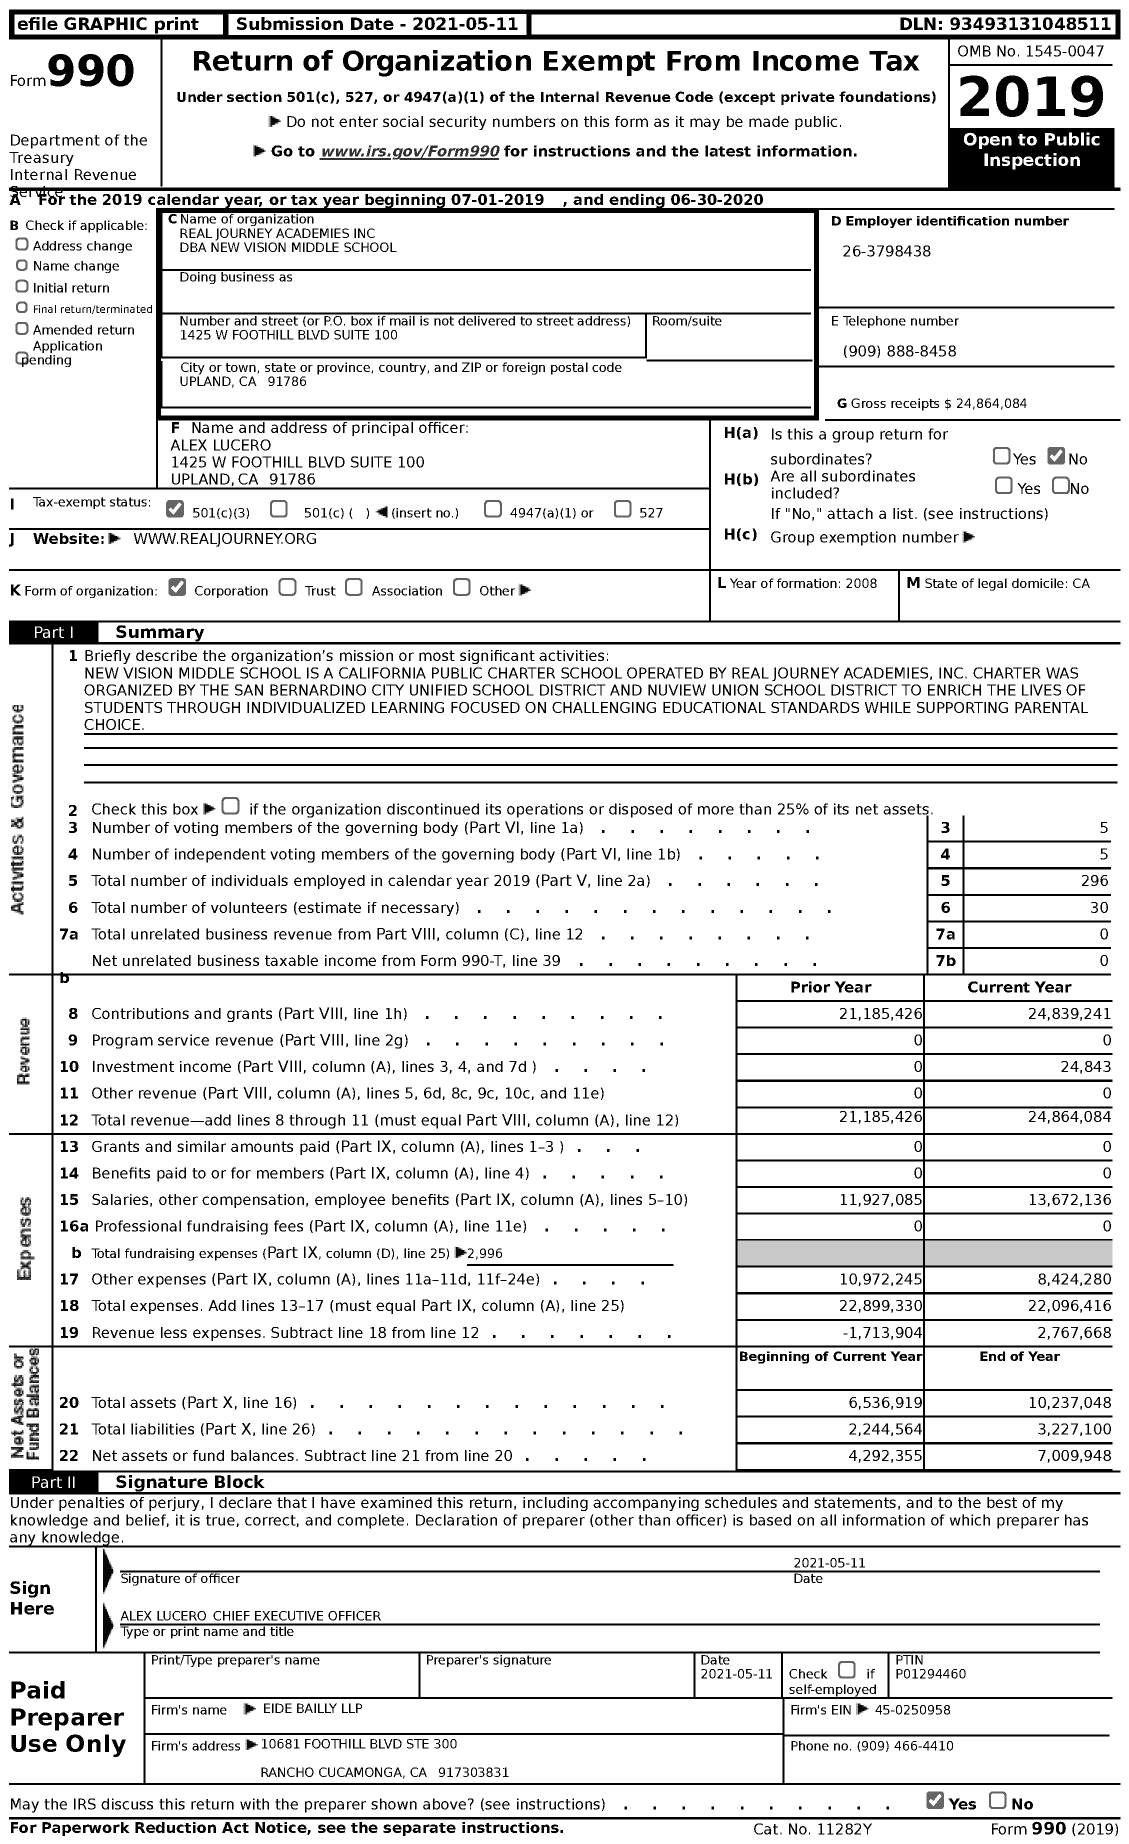 Image of first page of 2019 Form 990 for Real Journey Academies (RJA)